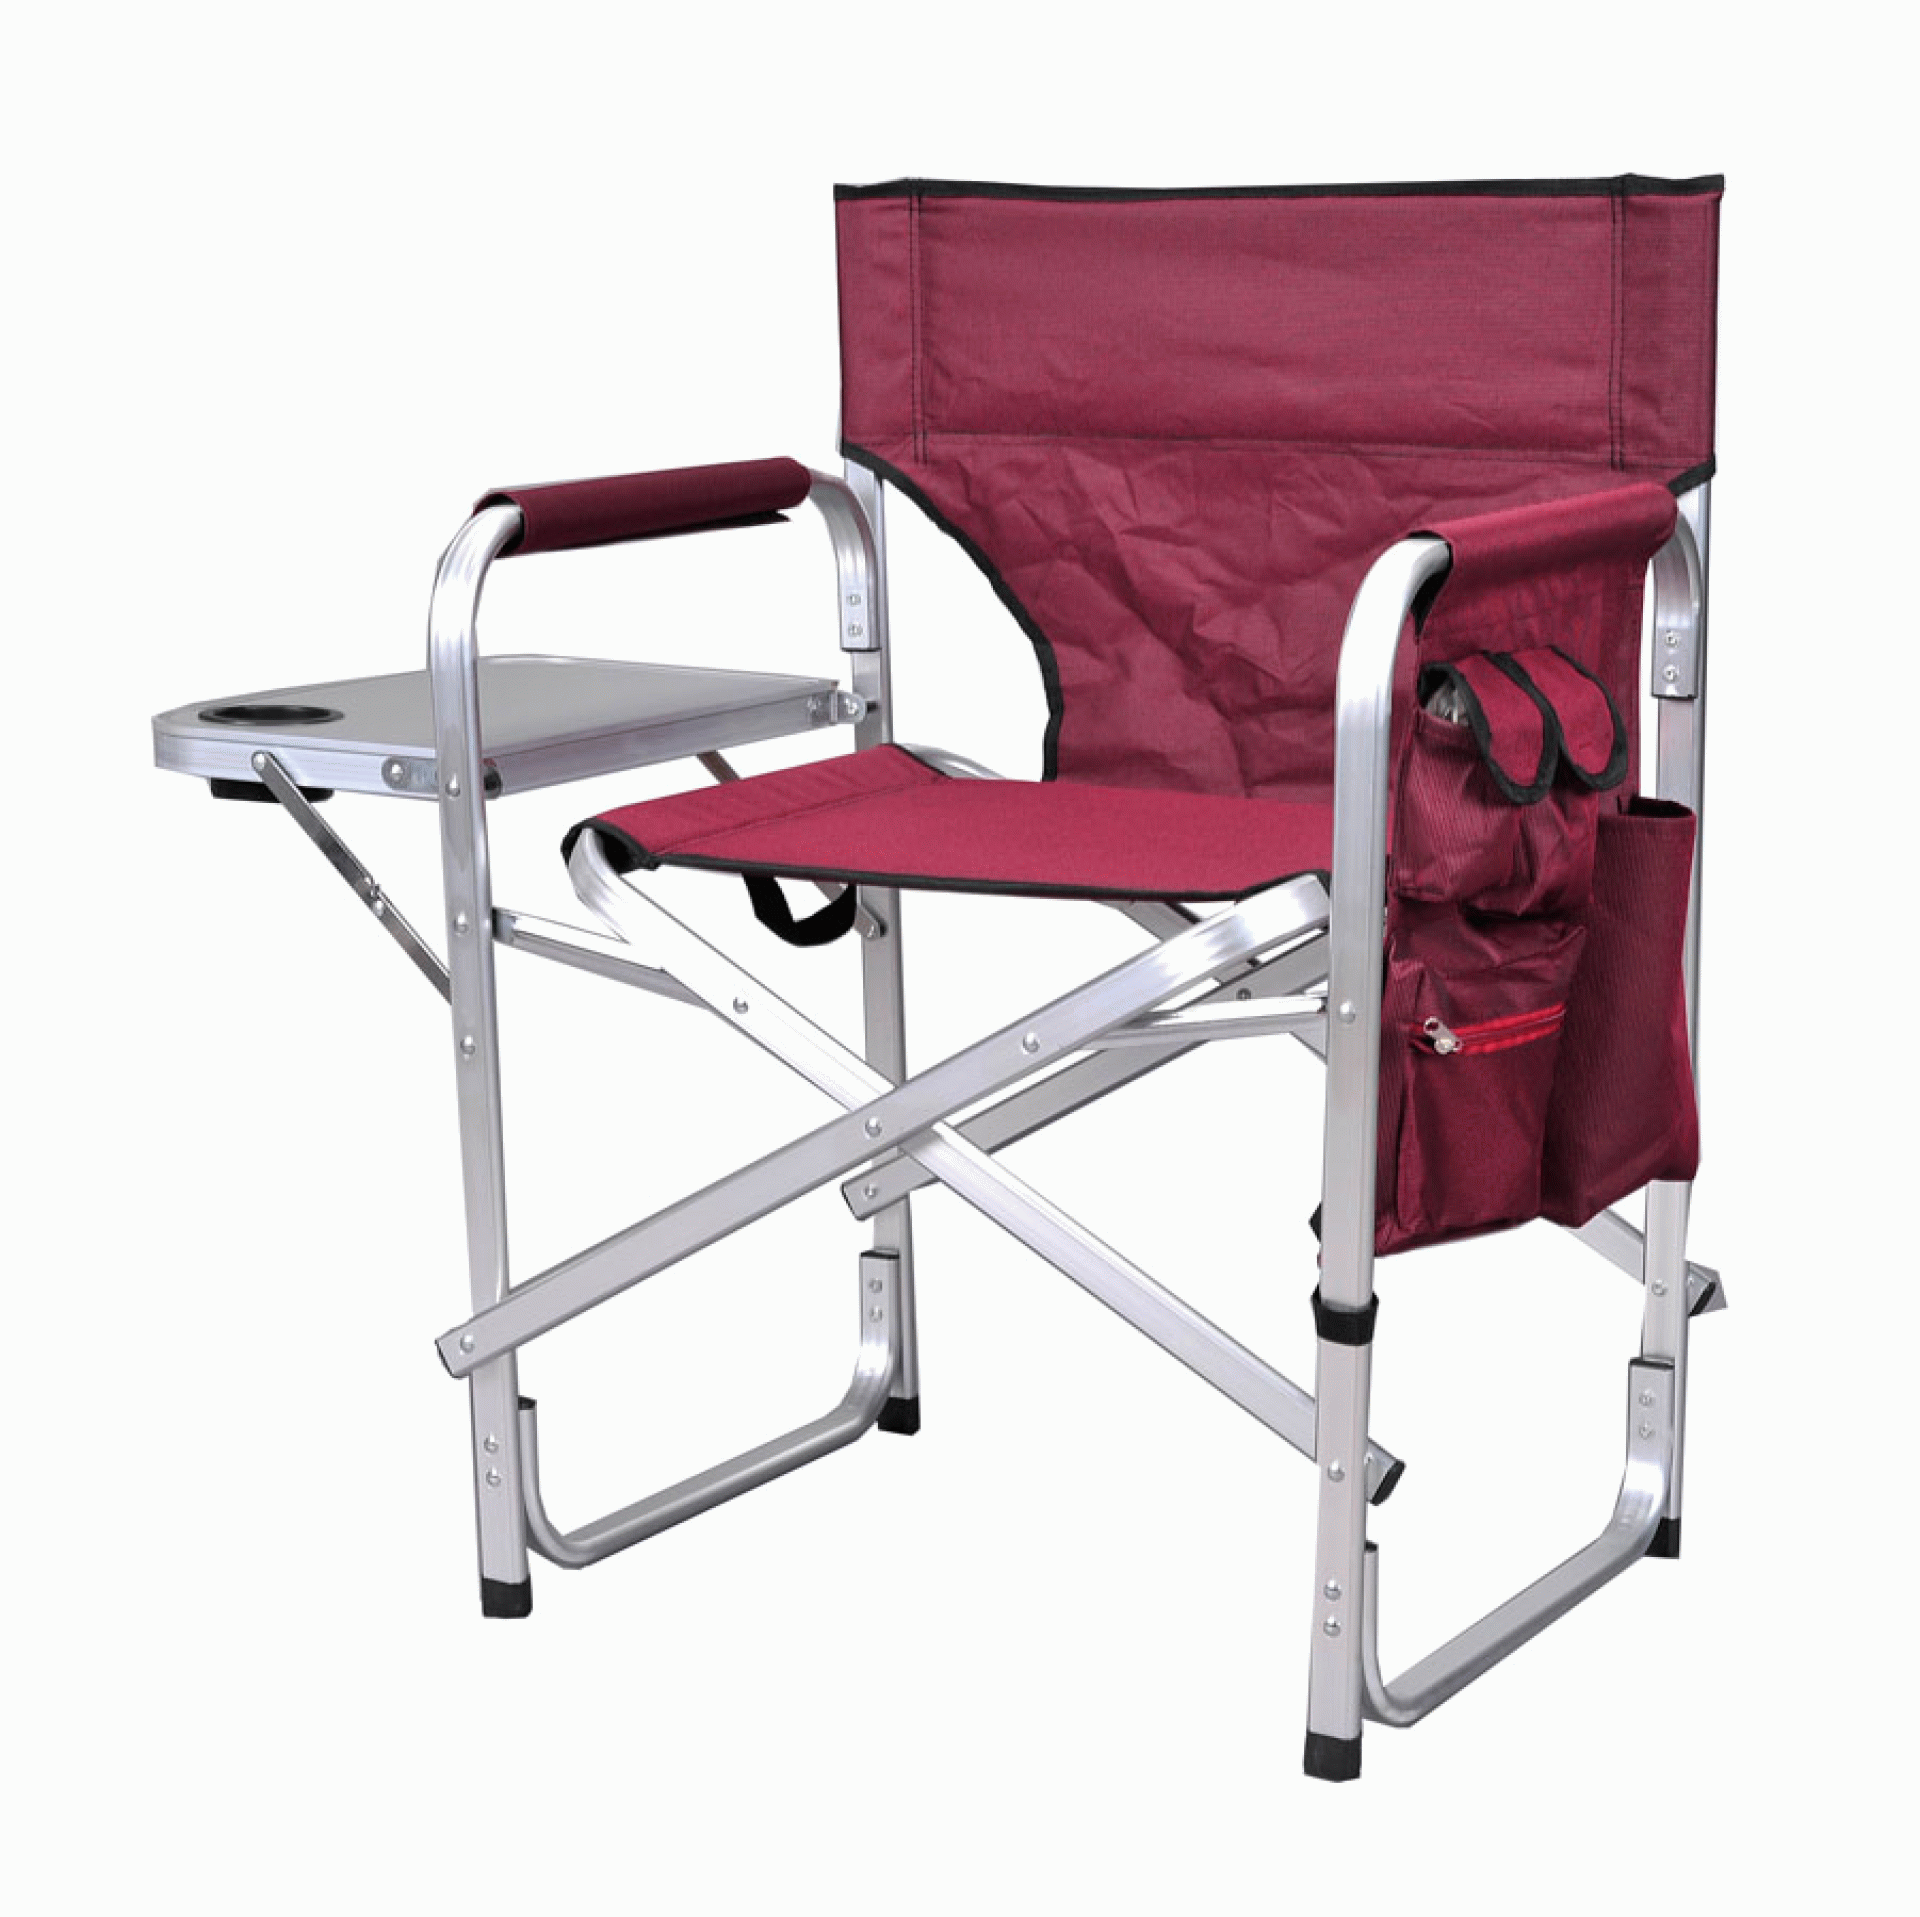 MINGS MARK INC. | SL1204BURGUNDY | DIRECTOR'S CHAIR W/ SIDE TABLE AND POCKETS - BURGUNDY